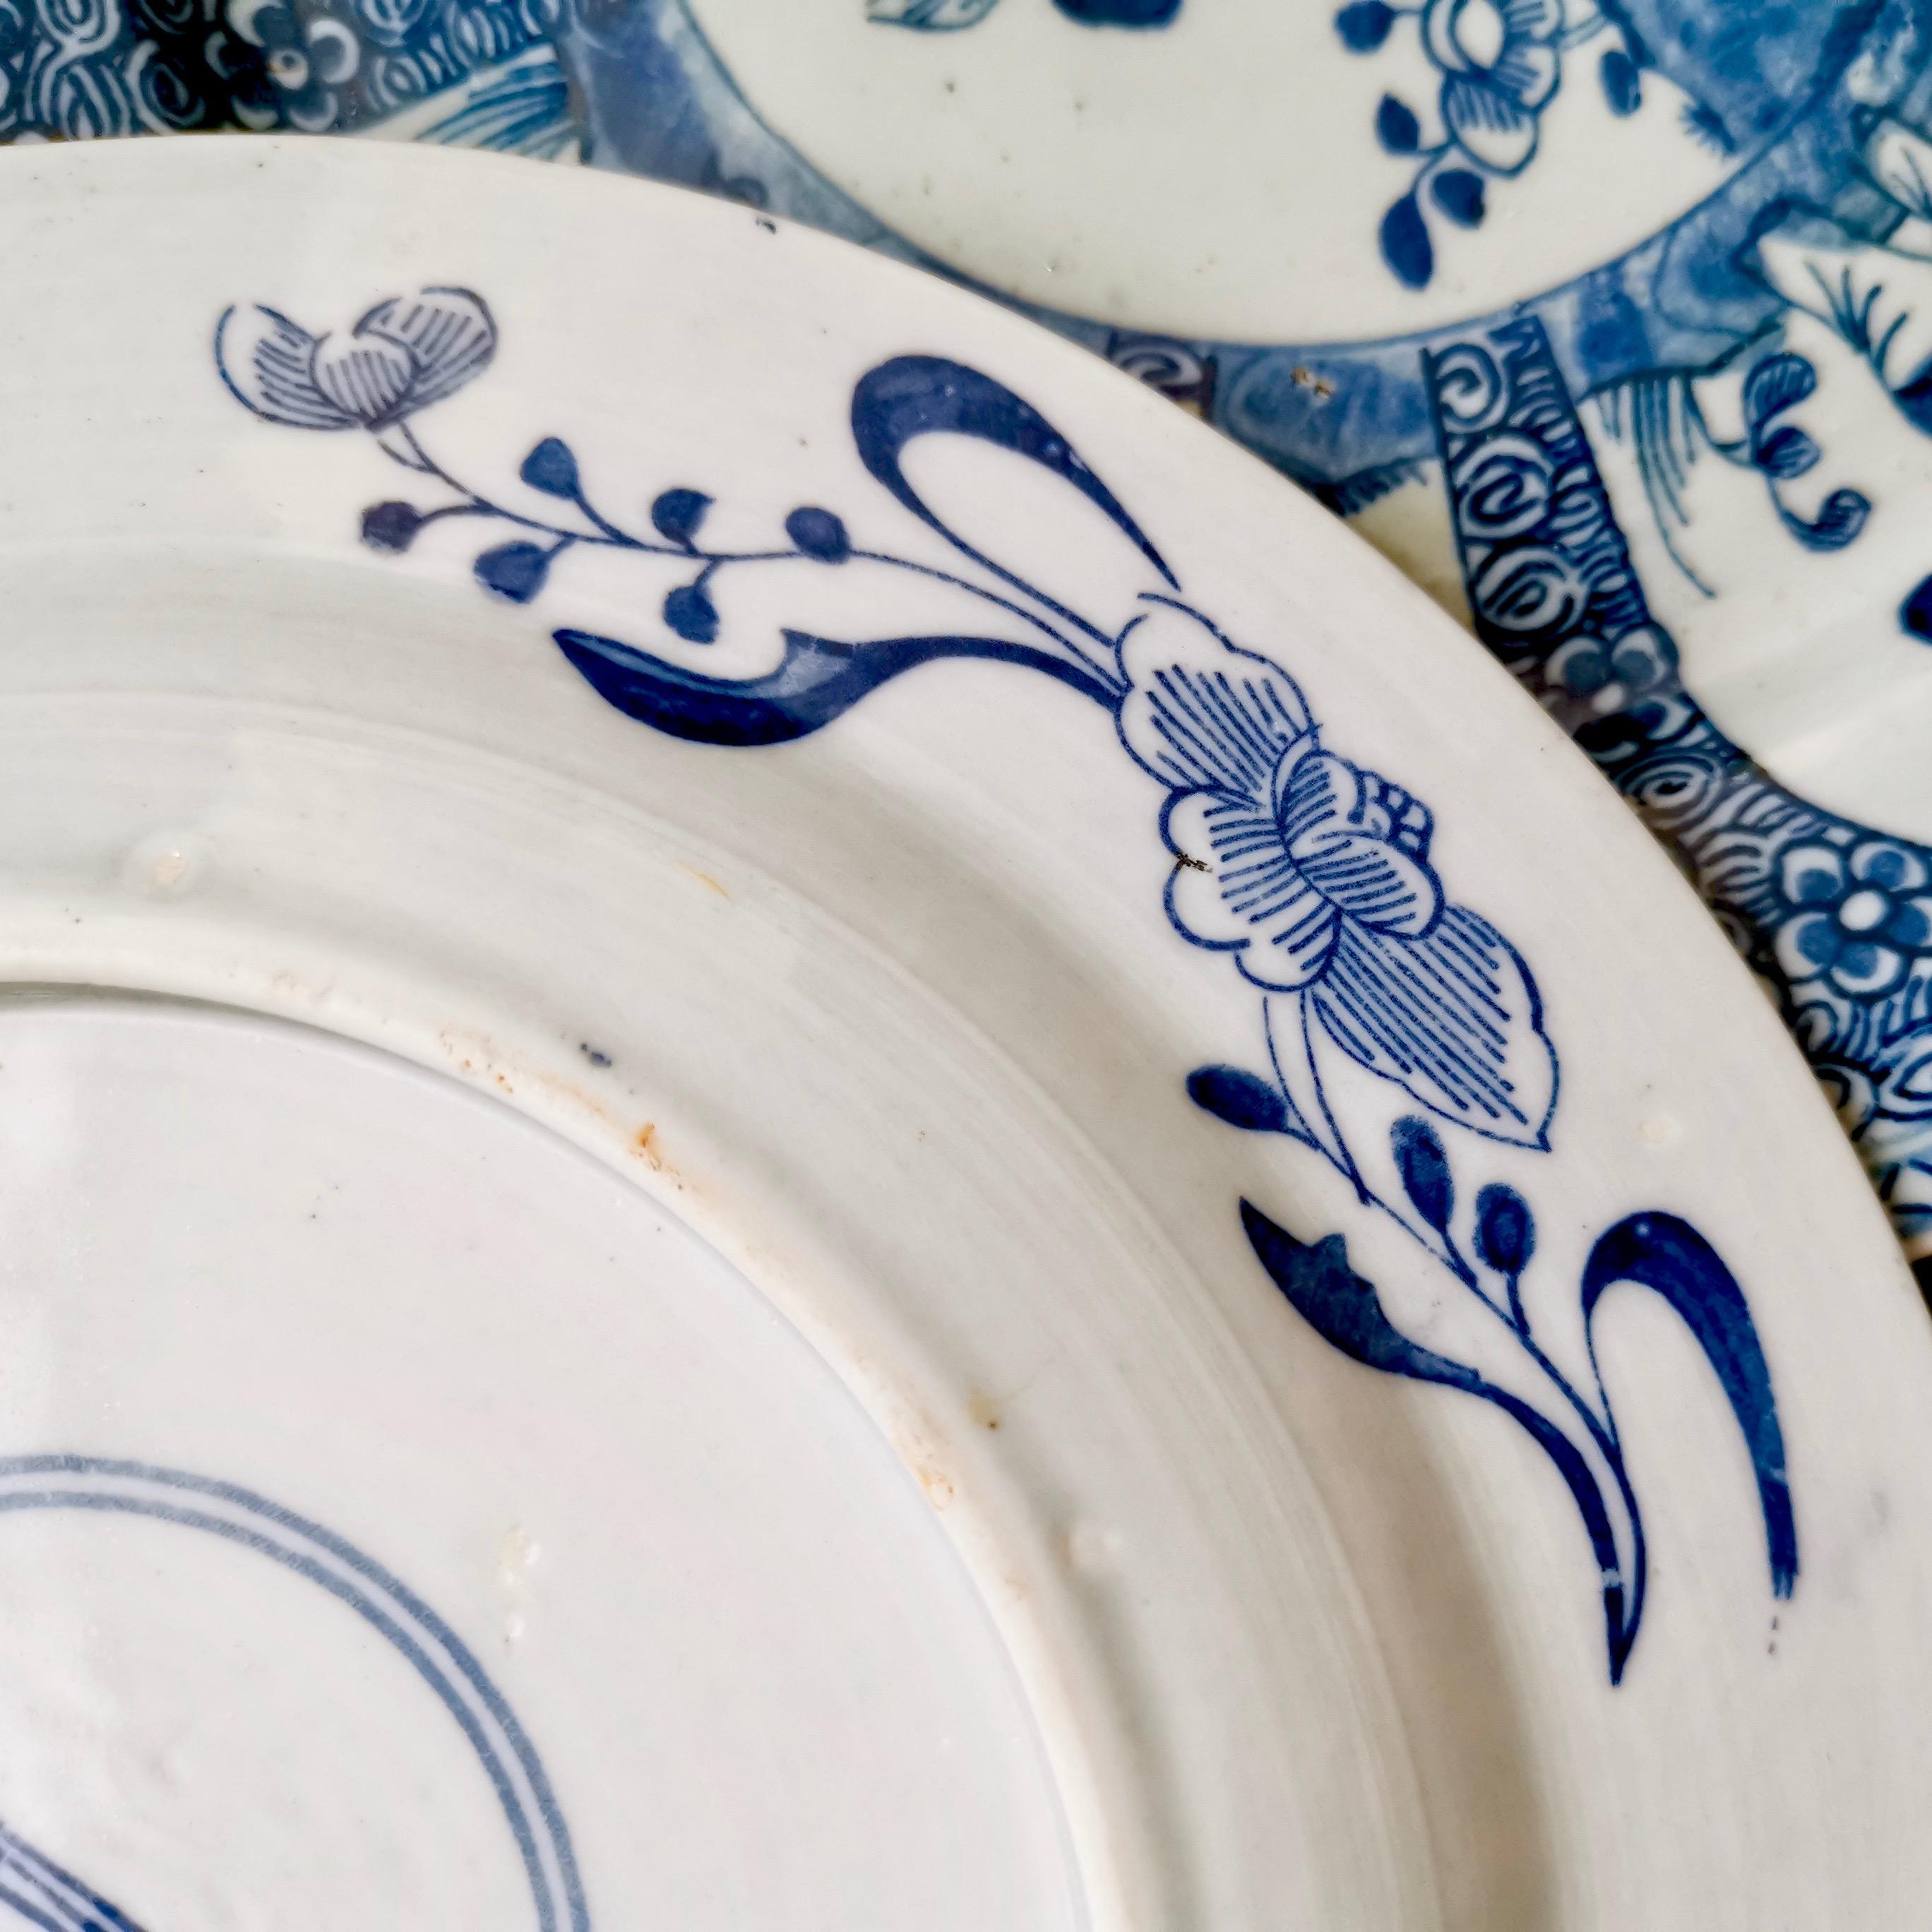 Set of 5 Chinese Export Plates, Blue and White, Boy with Butterfly, 19th Century 10